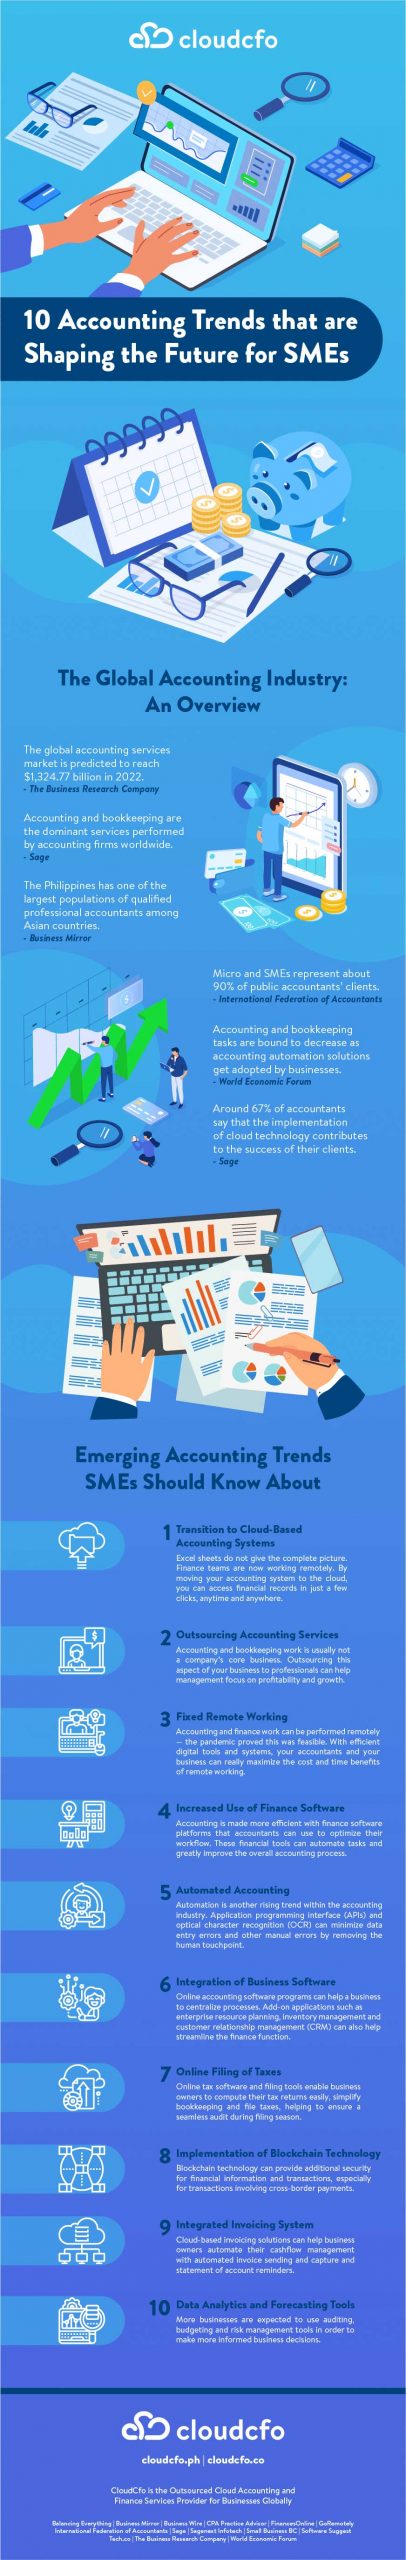 cloudcfo accounting trends changing sms future infographic